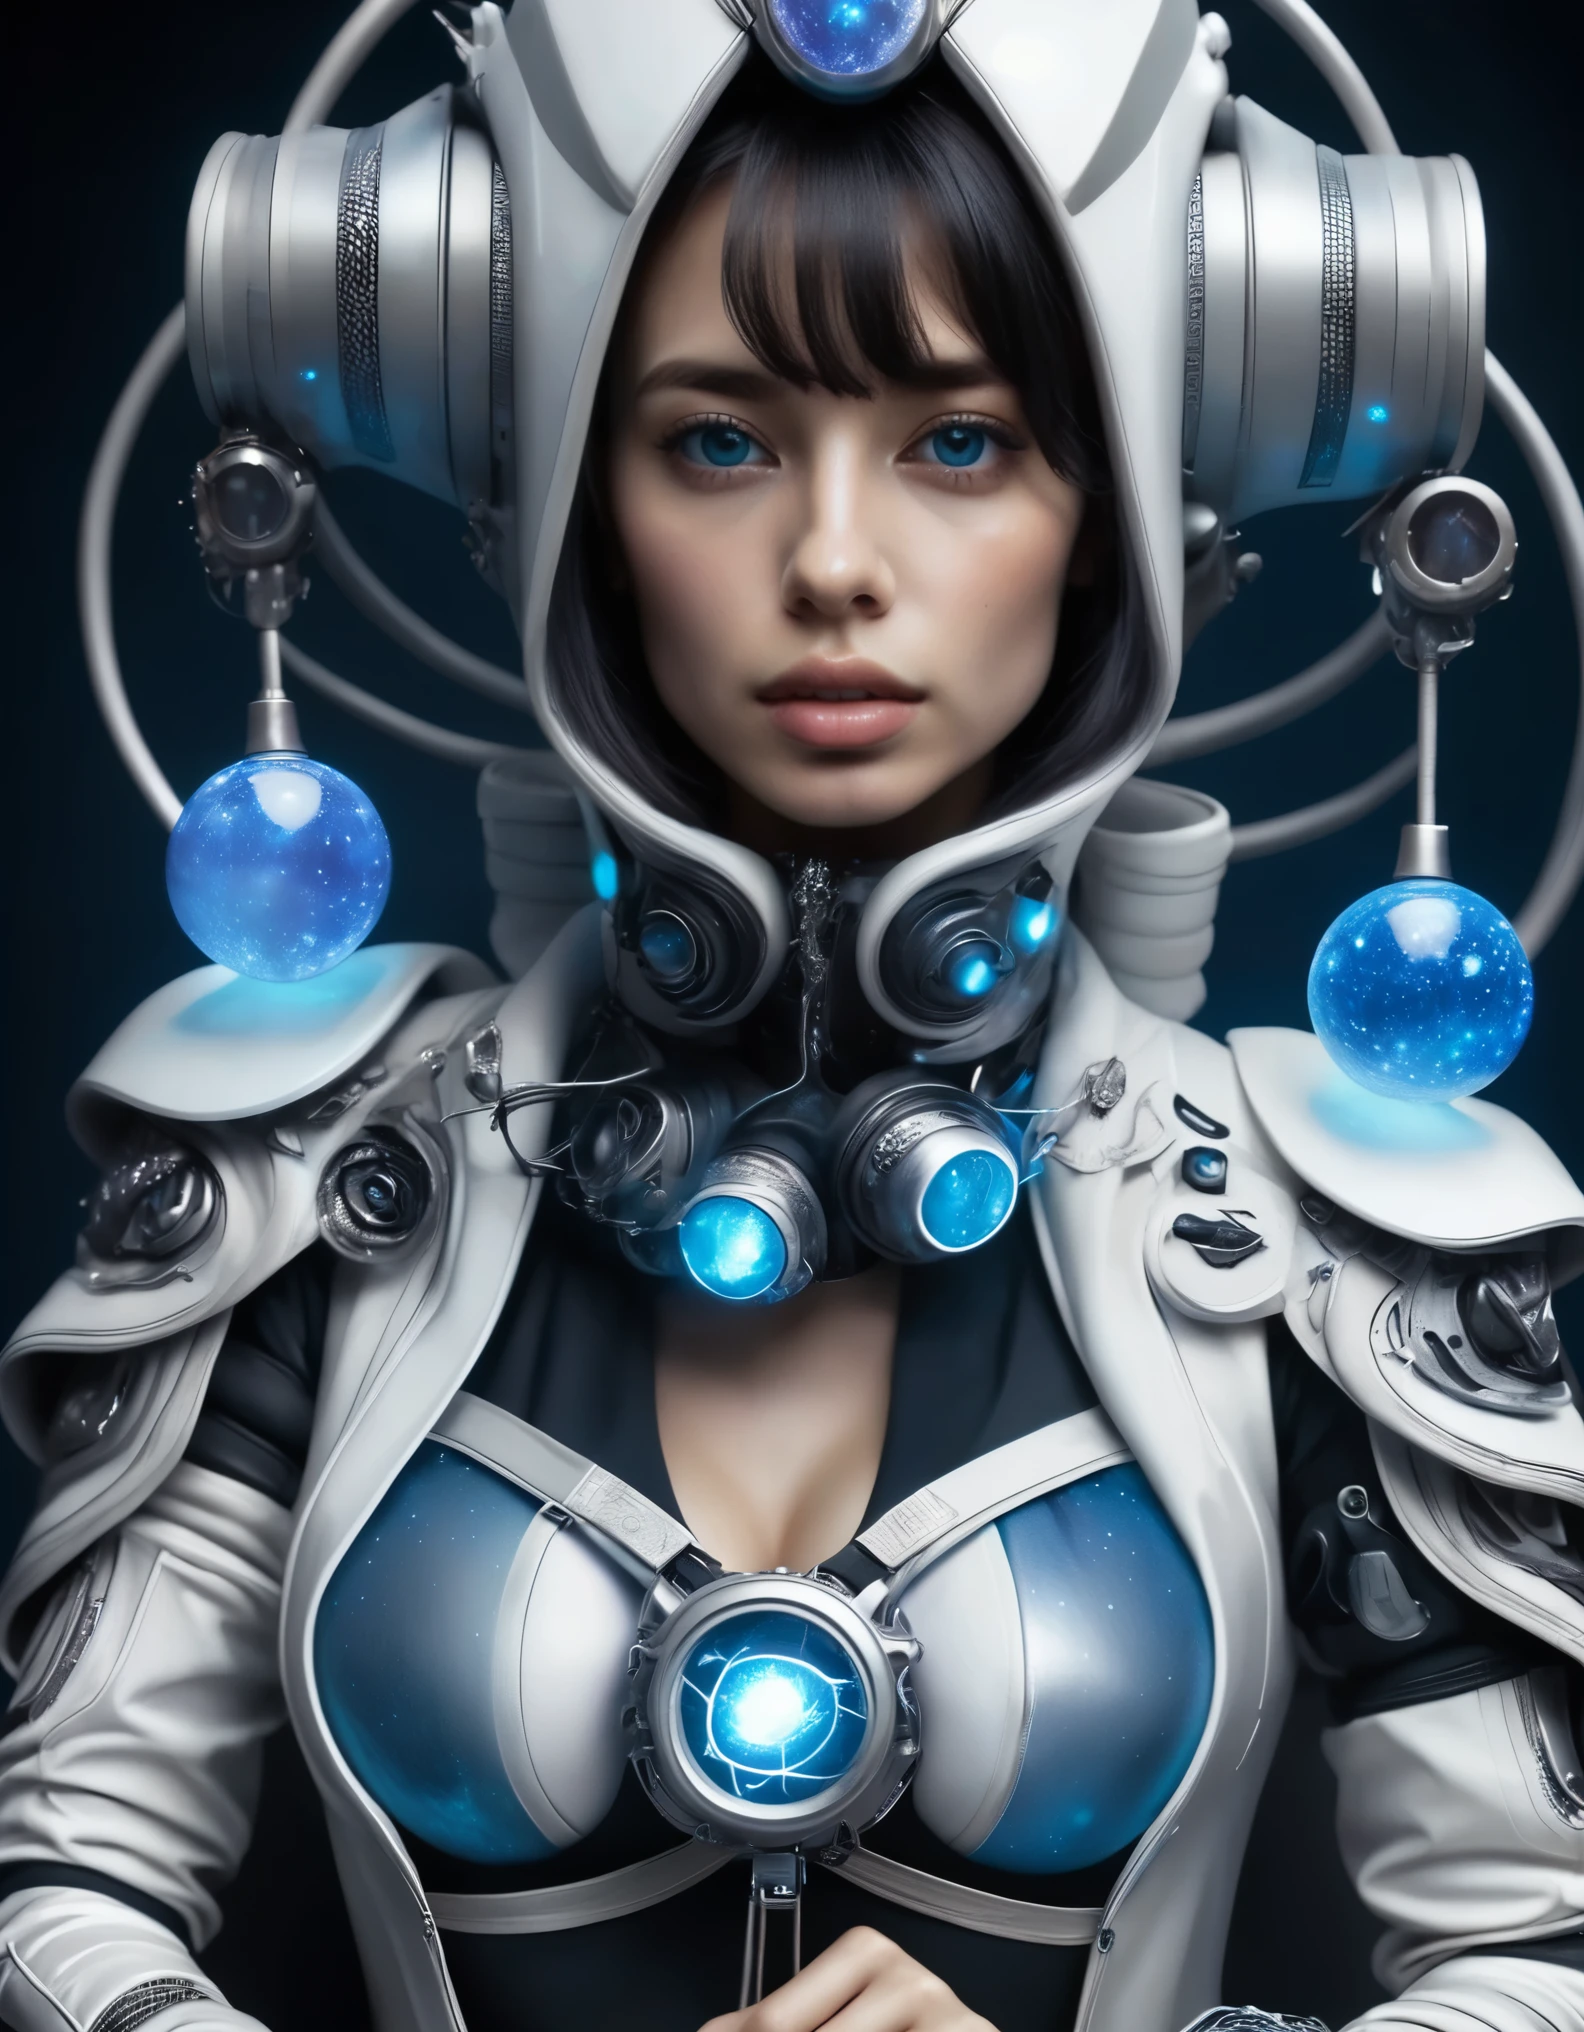 (nsfw:1.2), masterpiece, Best Quality, digital art, The avant-garde, Futuristic art, A mysterious and sophisticated young woman with blue eyes wears futuristic and sexy fashion art. She is seated at a wide below angle, with her full body in frame. Her outfit includes see-through white gear with multiple elastic white led harnesses designed underneath, and led hem, adding a minimalist beauty. She accessorizes with futuristic accessories and wears technical sneakers. Her demeanor exudes harmony and striking simplicity. hyper small head and face, happy, wide Duck mouth, half open mouth, perfectly aligned teeth, perfect beautiful teeth, light blue eyes, half open eyes, shiny Droopy eyes, gray hair, looking other, She is situated within the interior of a futuristic colony, BREAK  (very slim waist:1.2), (perfect balanced Soft huge breasts, cleavage, large buttocks, beautiful long legs:1.2), (Cramped breasts, A glamorous body with clothes:1.4), exuding a sculptural beauty, (Realistic Soft skin texture, oily skin, White and beautiful Silky skin:1.4), with mist drifting and steam rising from concrete